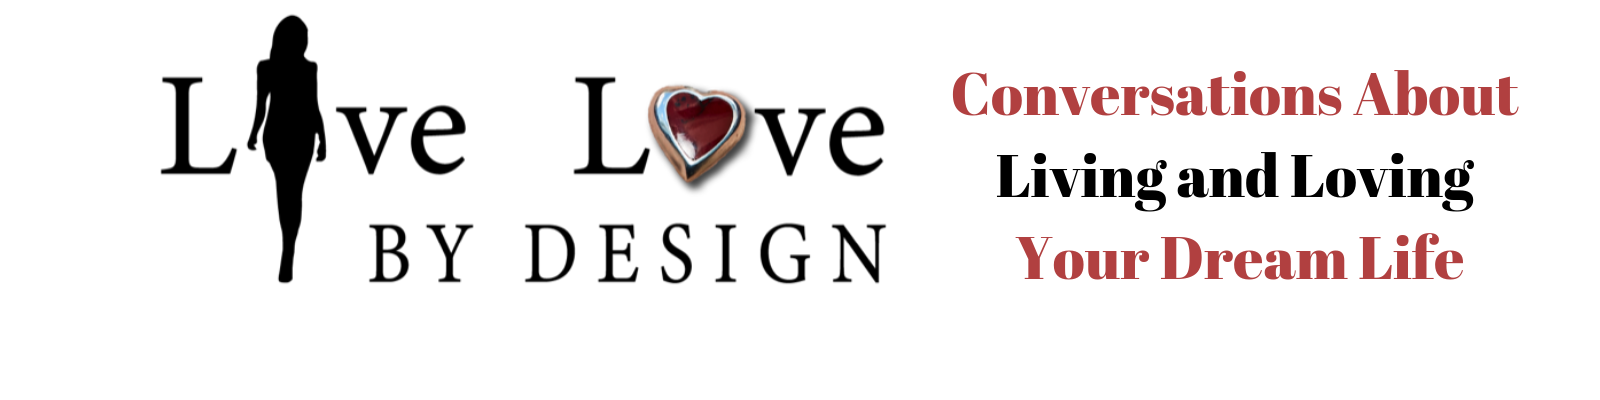 Live Love By Design